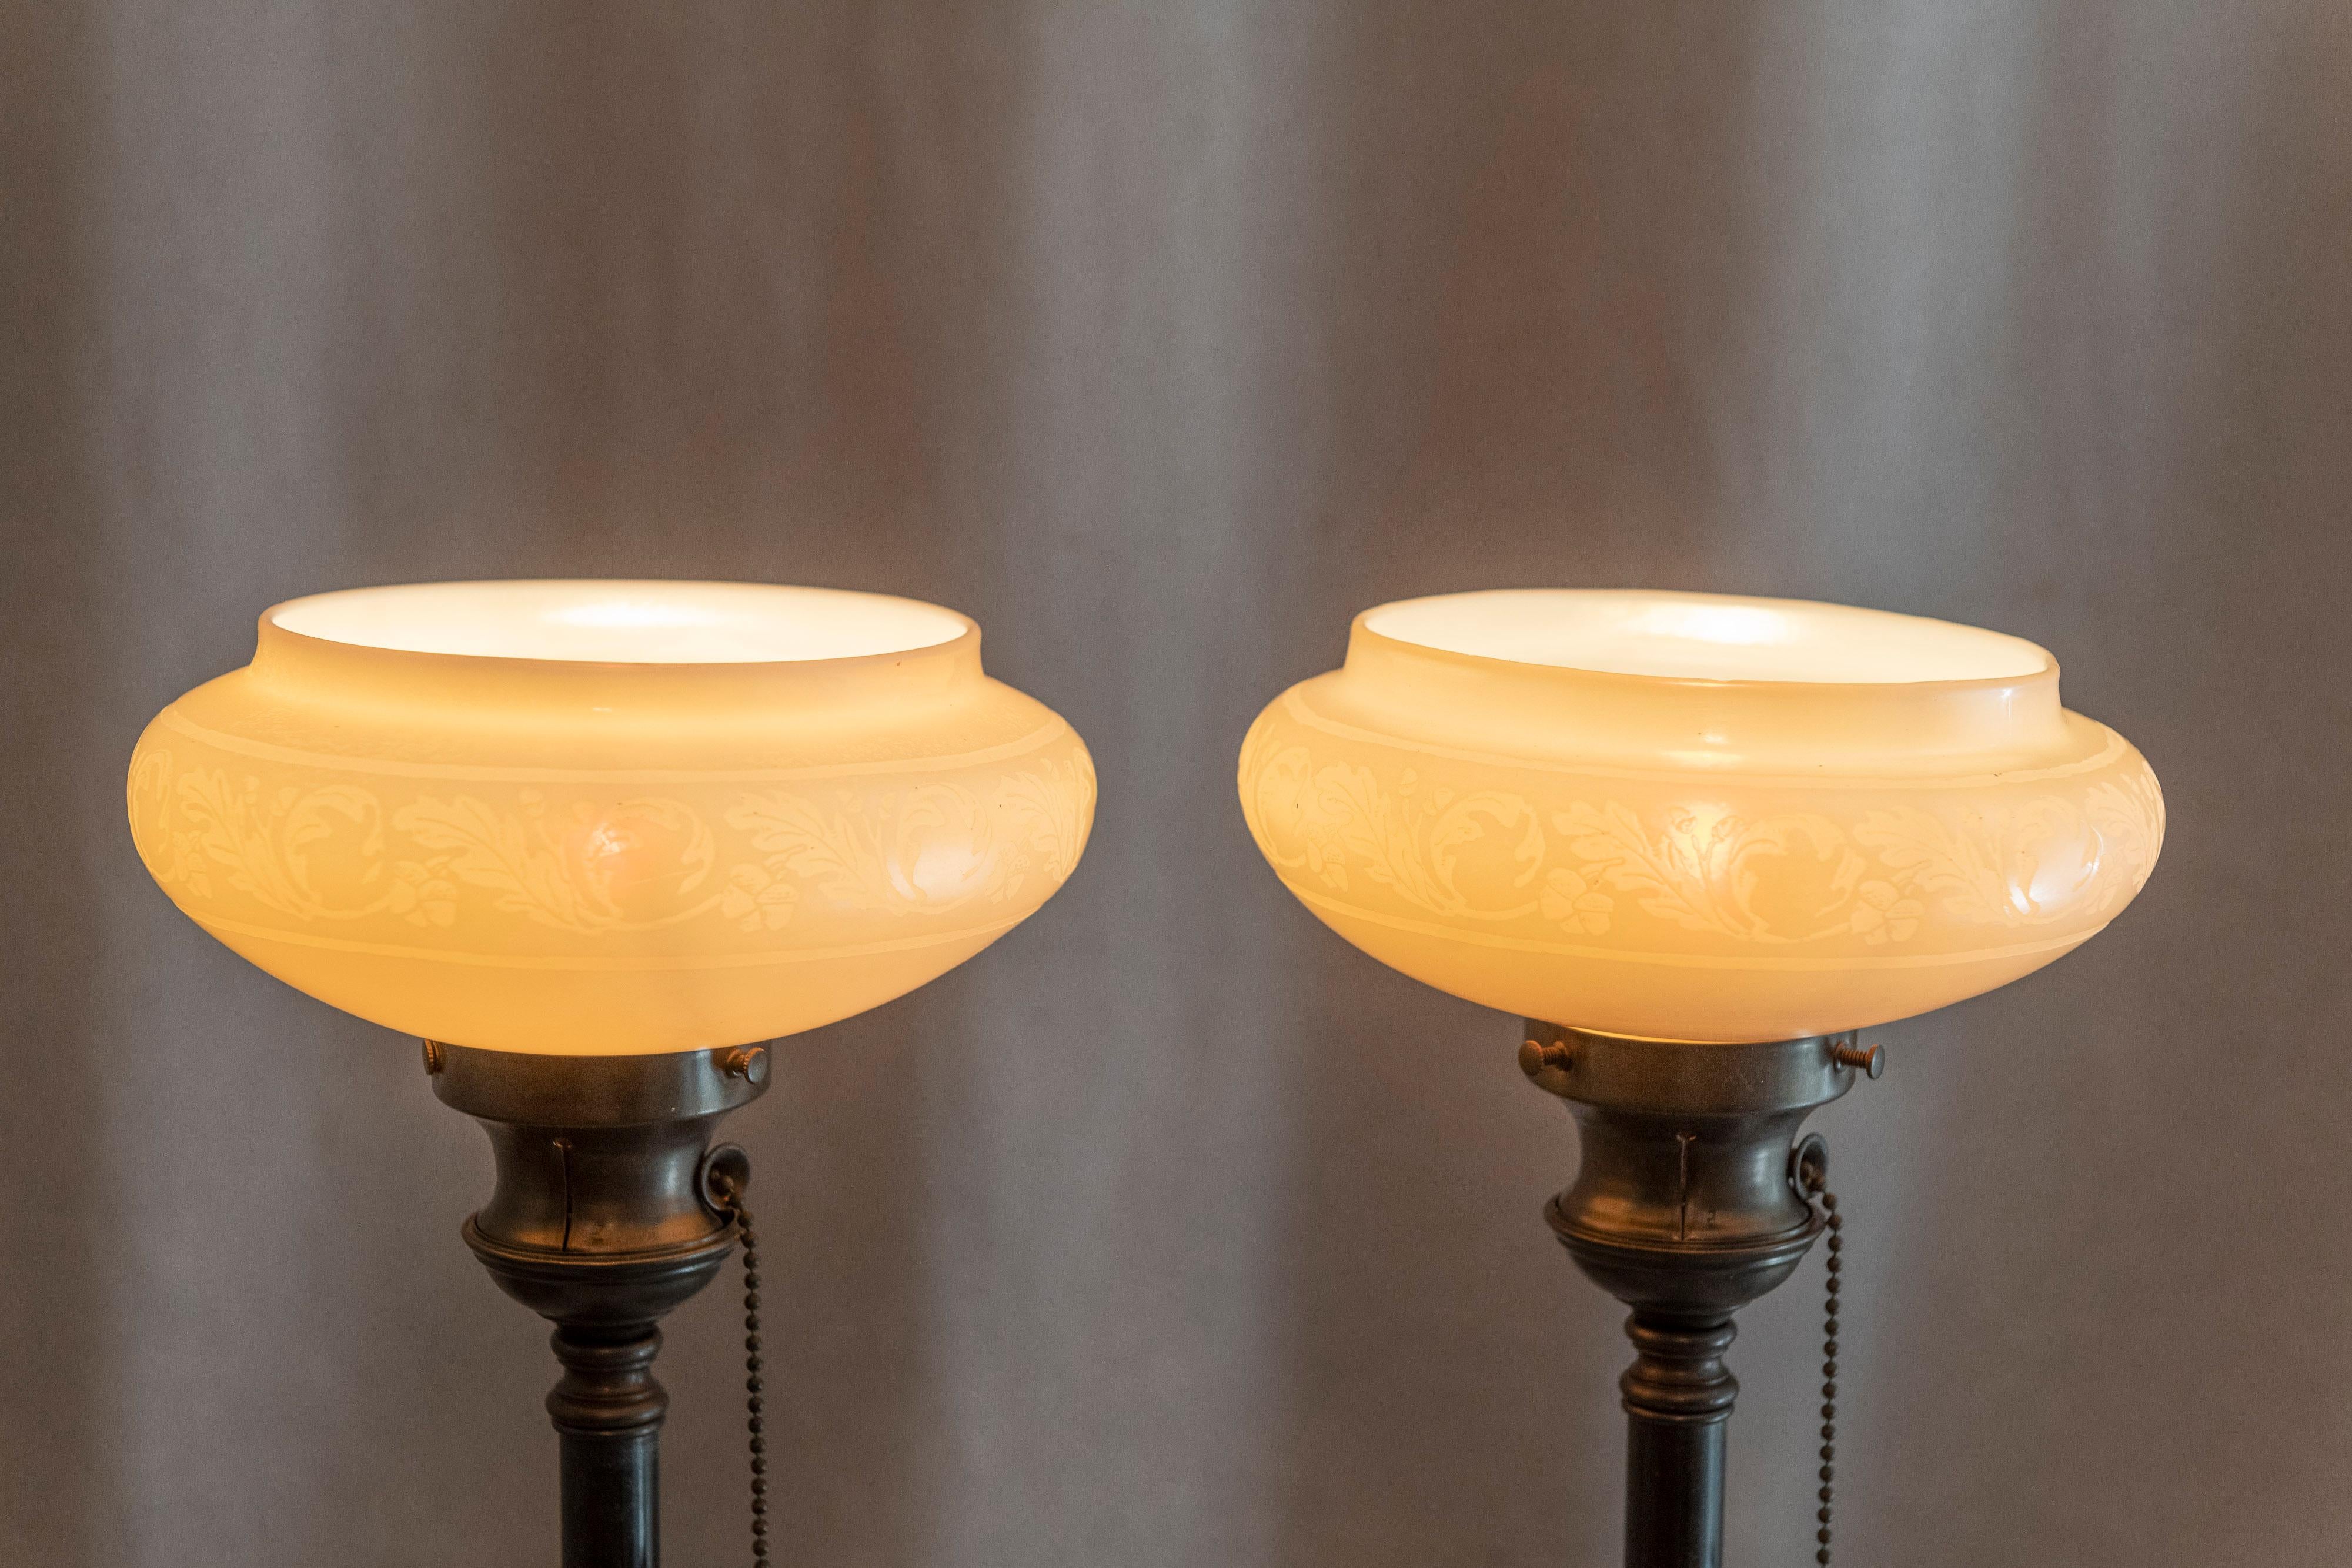 20th Century Pair Of Short Torchiere Lamps, Steuben Calcite Shades, Bronze Bases, ca. 1910